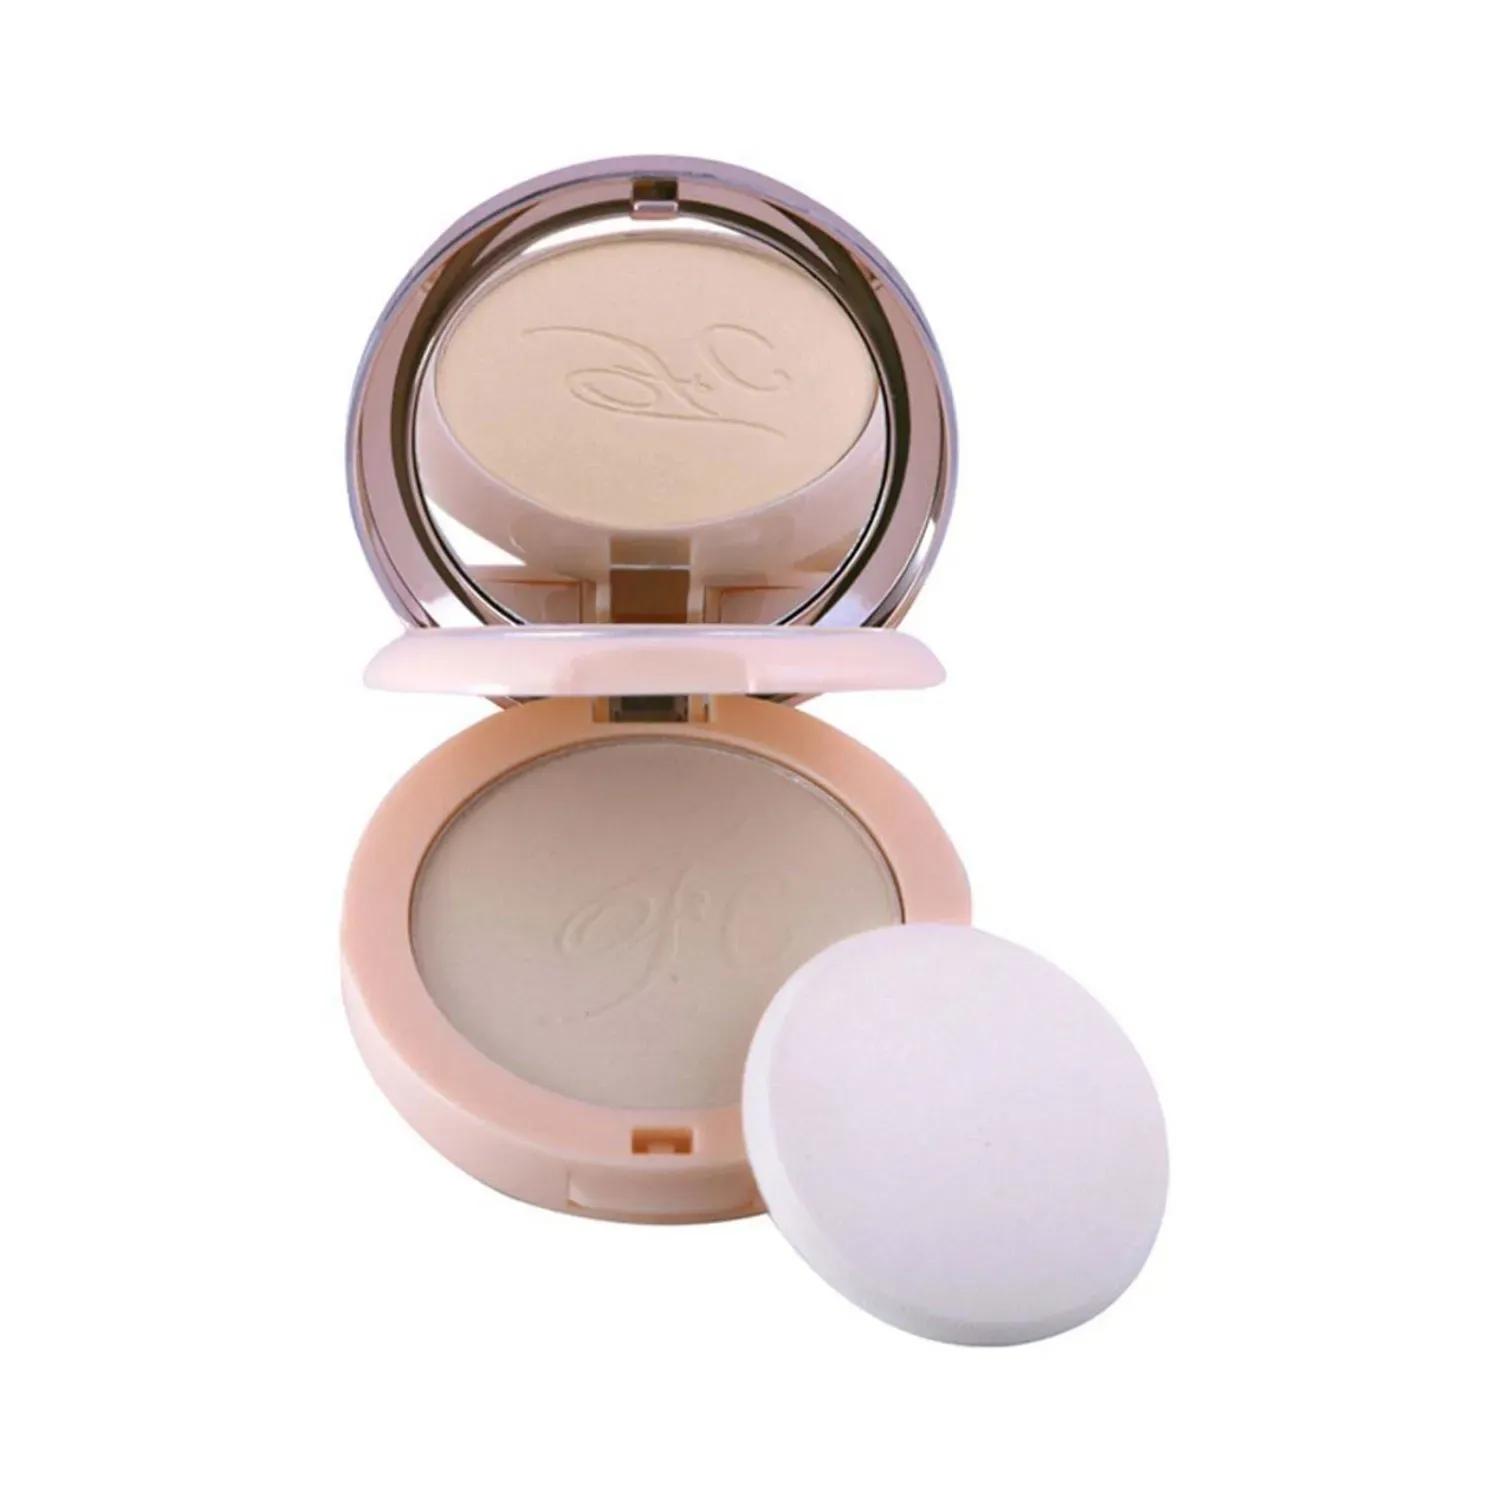 fashion colour nude makeover 2-in-1 compact face powder - 03 shade (20g)